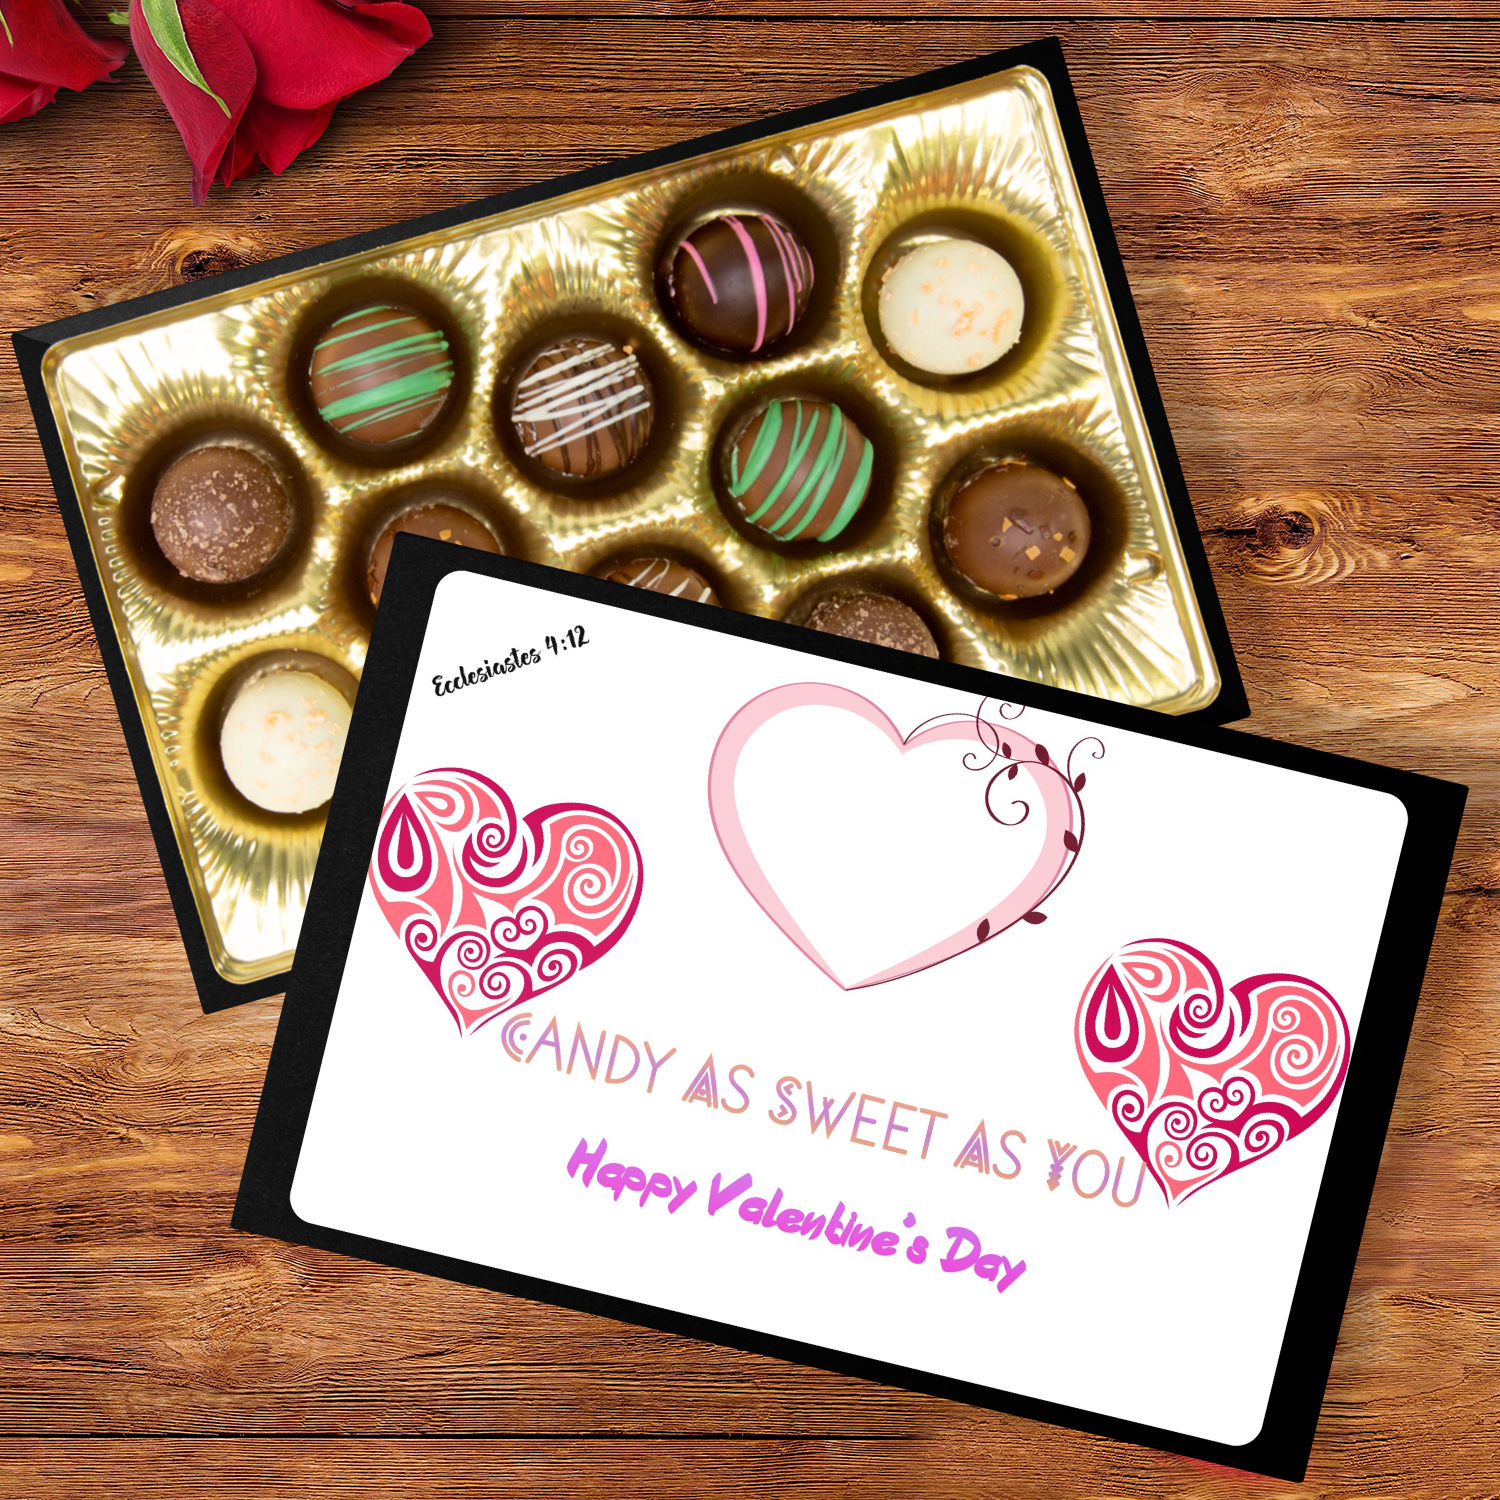 - Sweet As You Ecclesiastes 4:12 Handmade Artisan Chocolate Truffle Valentine's Day 12 count Gift Box- Ships from The US - Chocolate Truffle Gift Box at TFC&H Co.